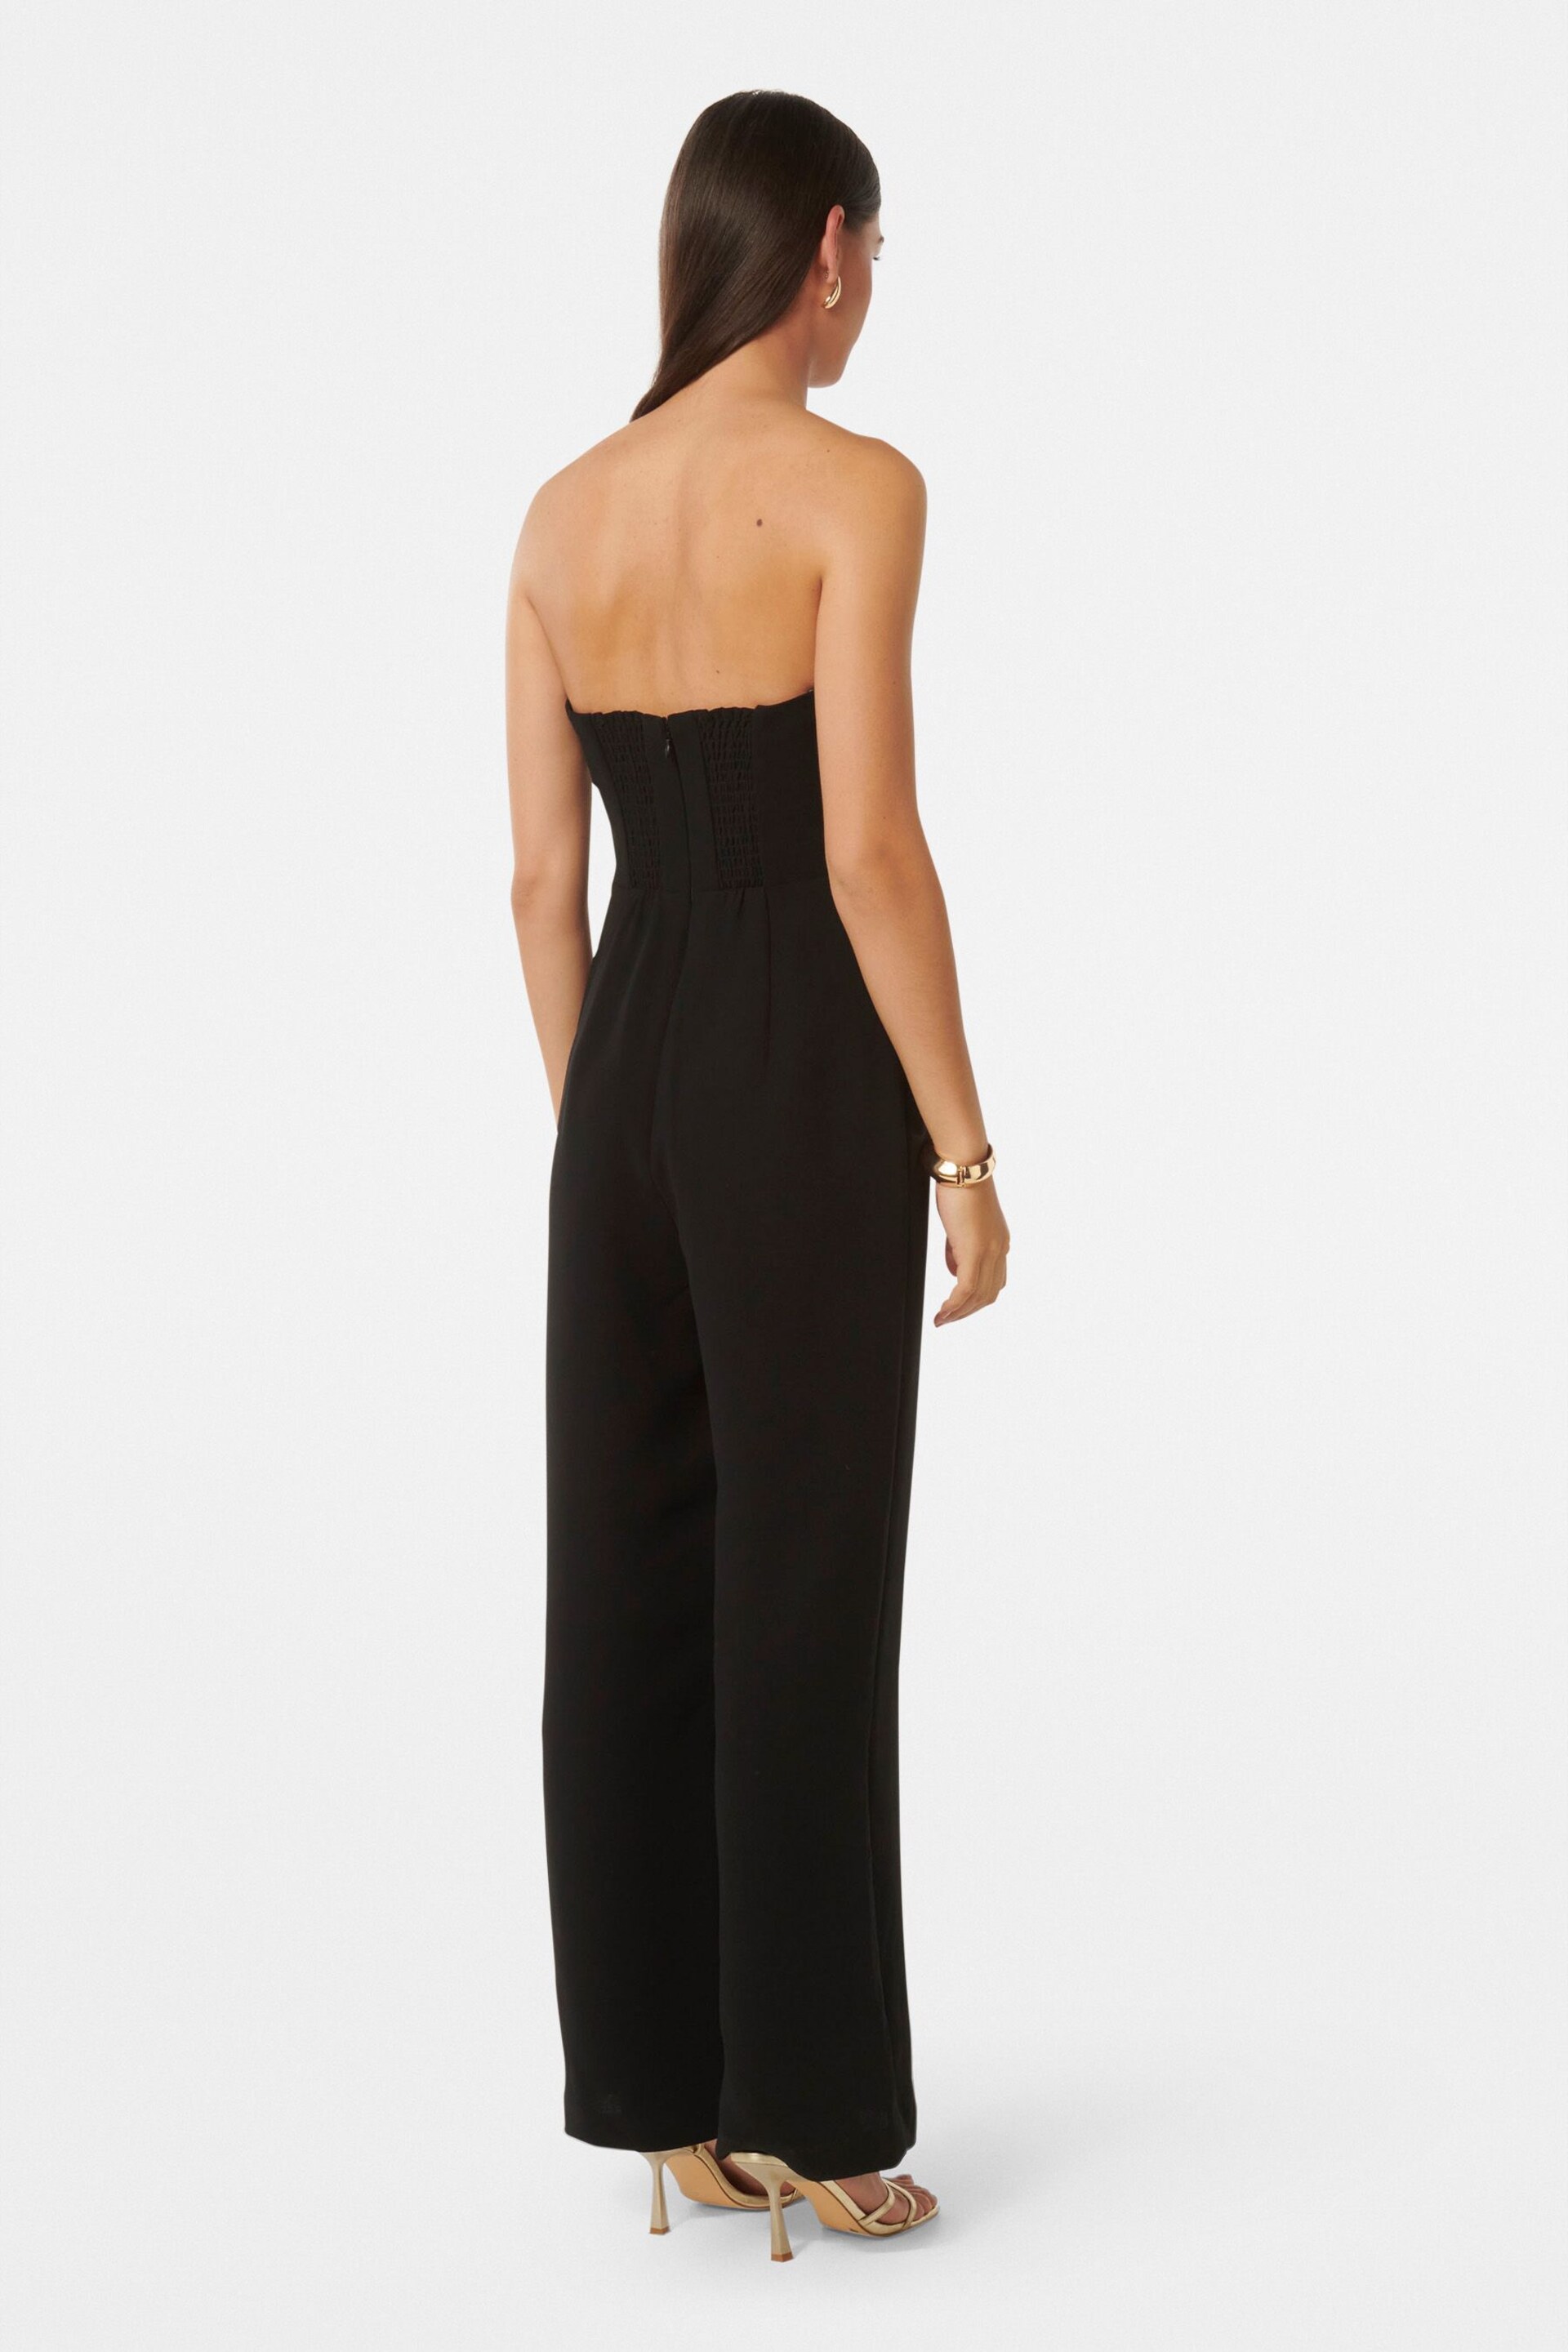 Forever New Black Vicky Strapless Bow Jumpsuit - Image 4 of 4